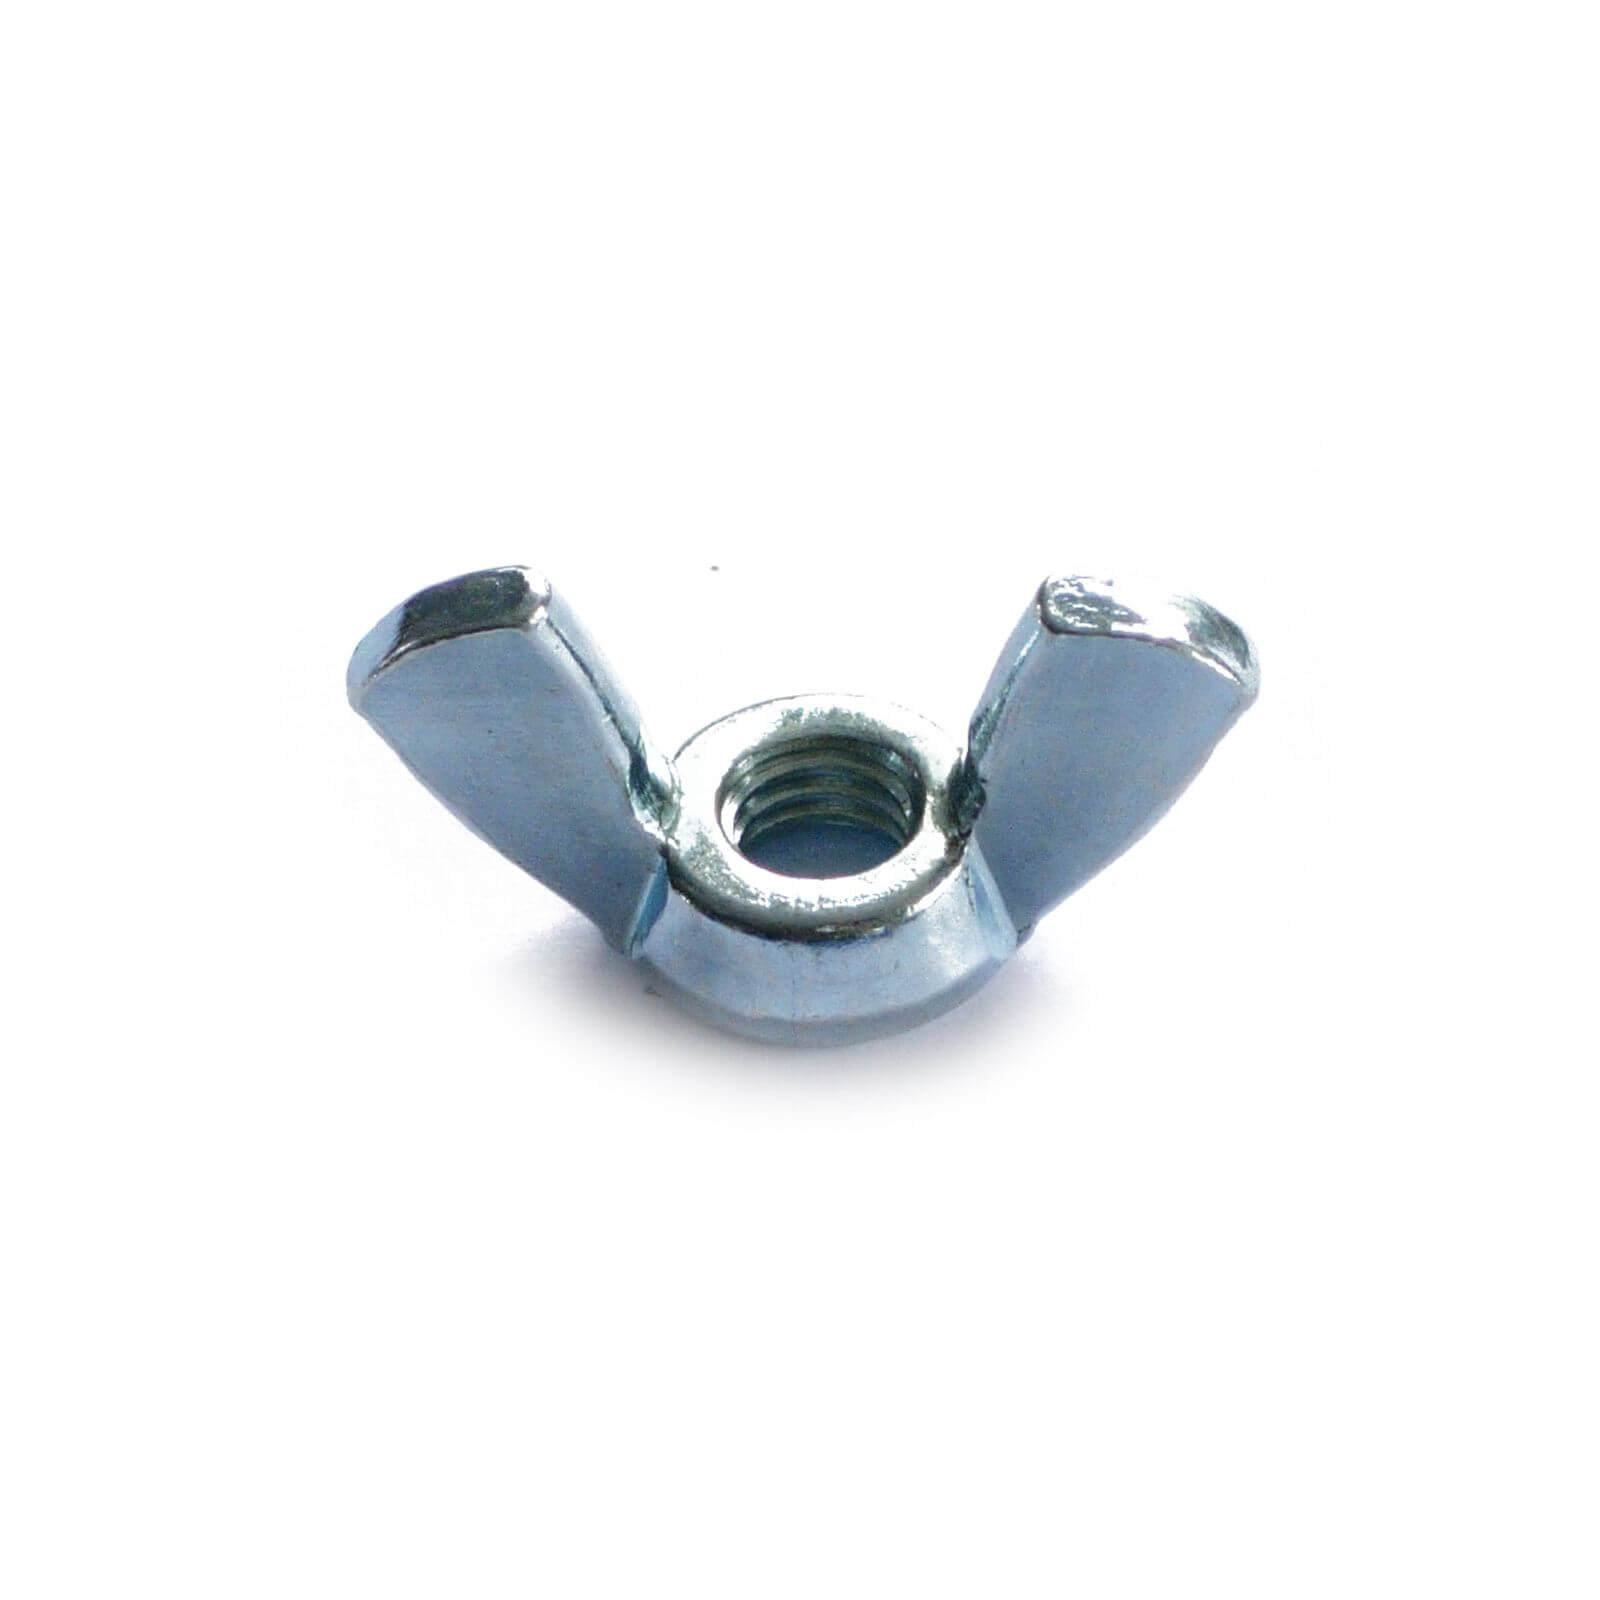 Wing Nut - Bright Zinc Plated - M5 - 5 Pack